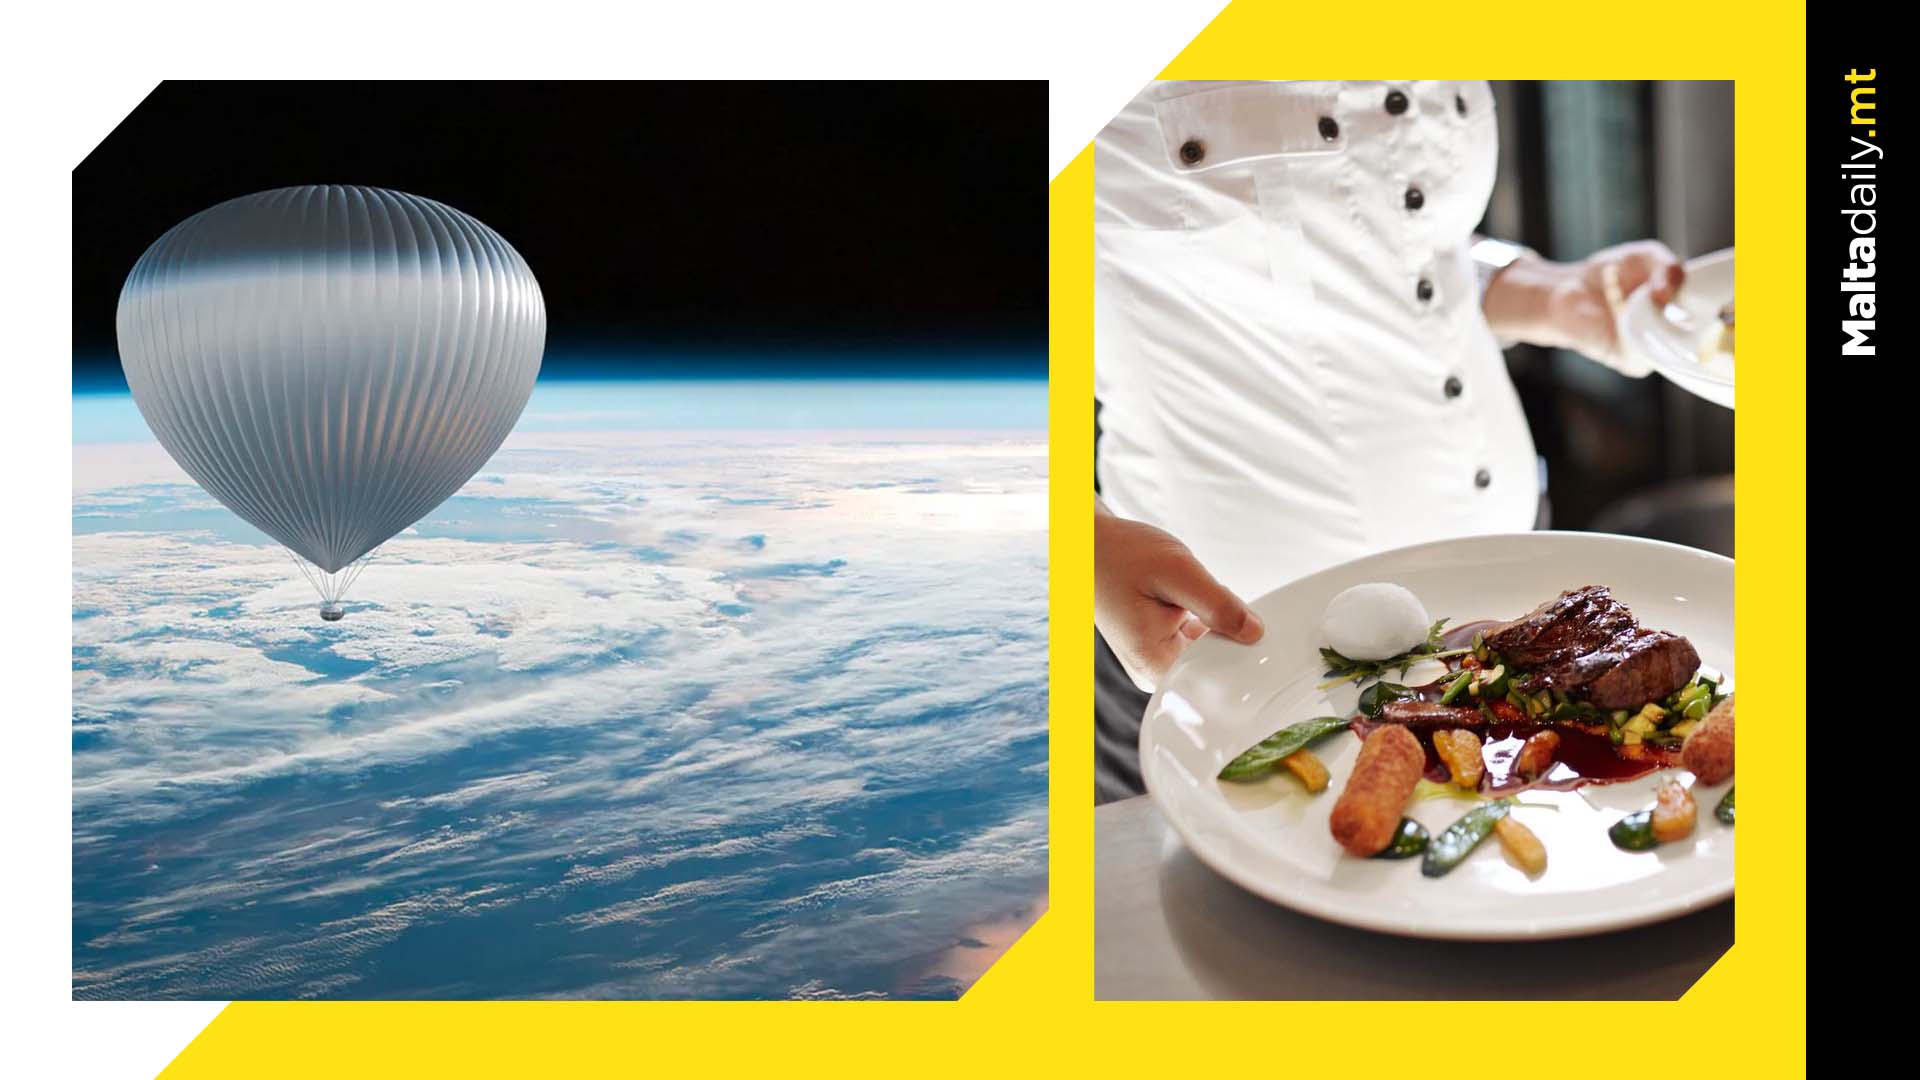 YOU MIGHT SOON BE ABLE TO EAT IN A MICHELIN STAR RESTAURANT IN SPACE